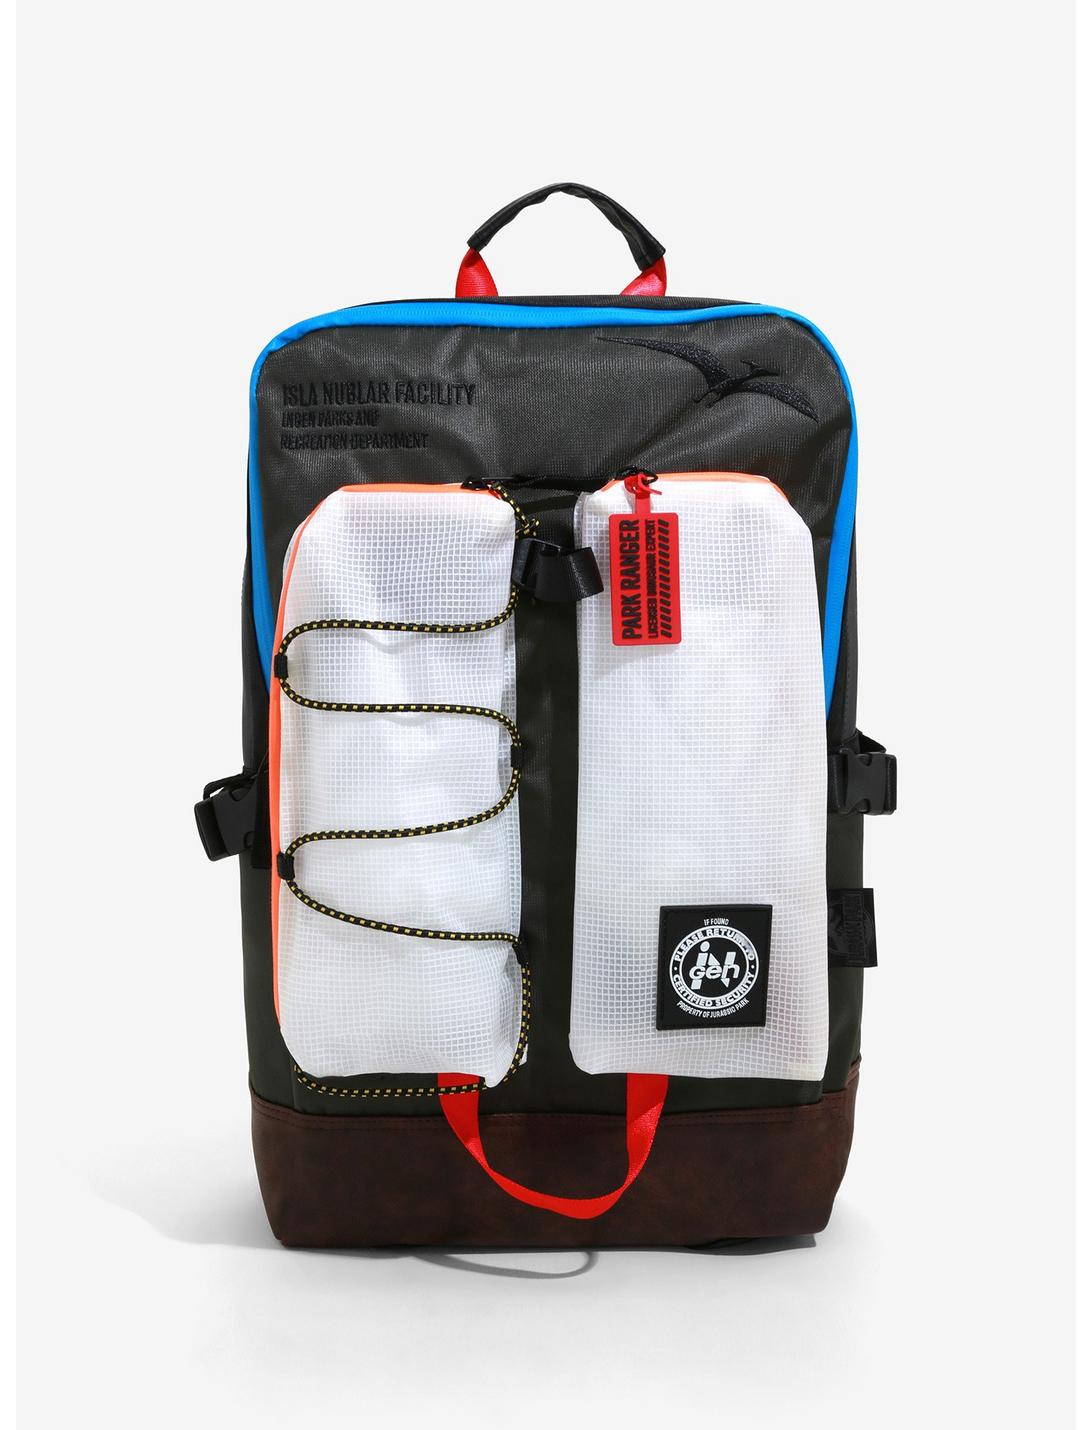 Jurassic Park Isla Nublar Facility Backpack - BoxLunch Exclusive, , hi-res